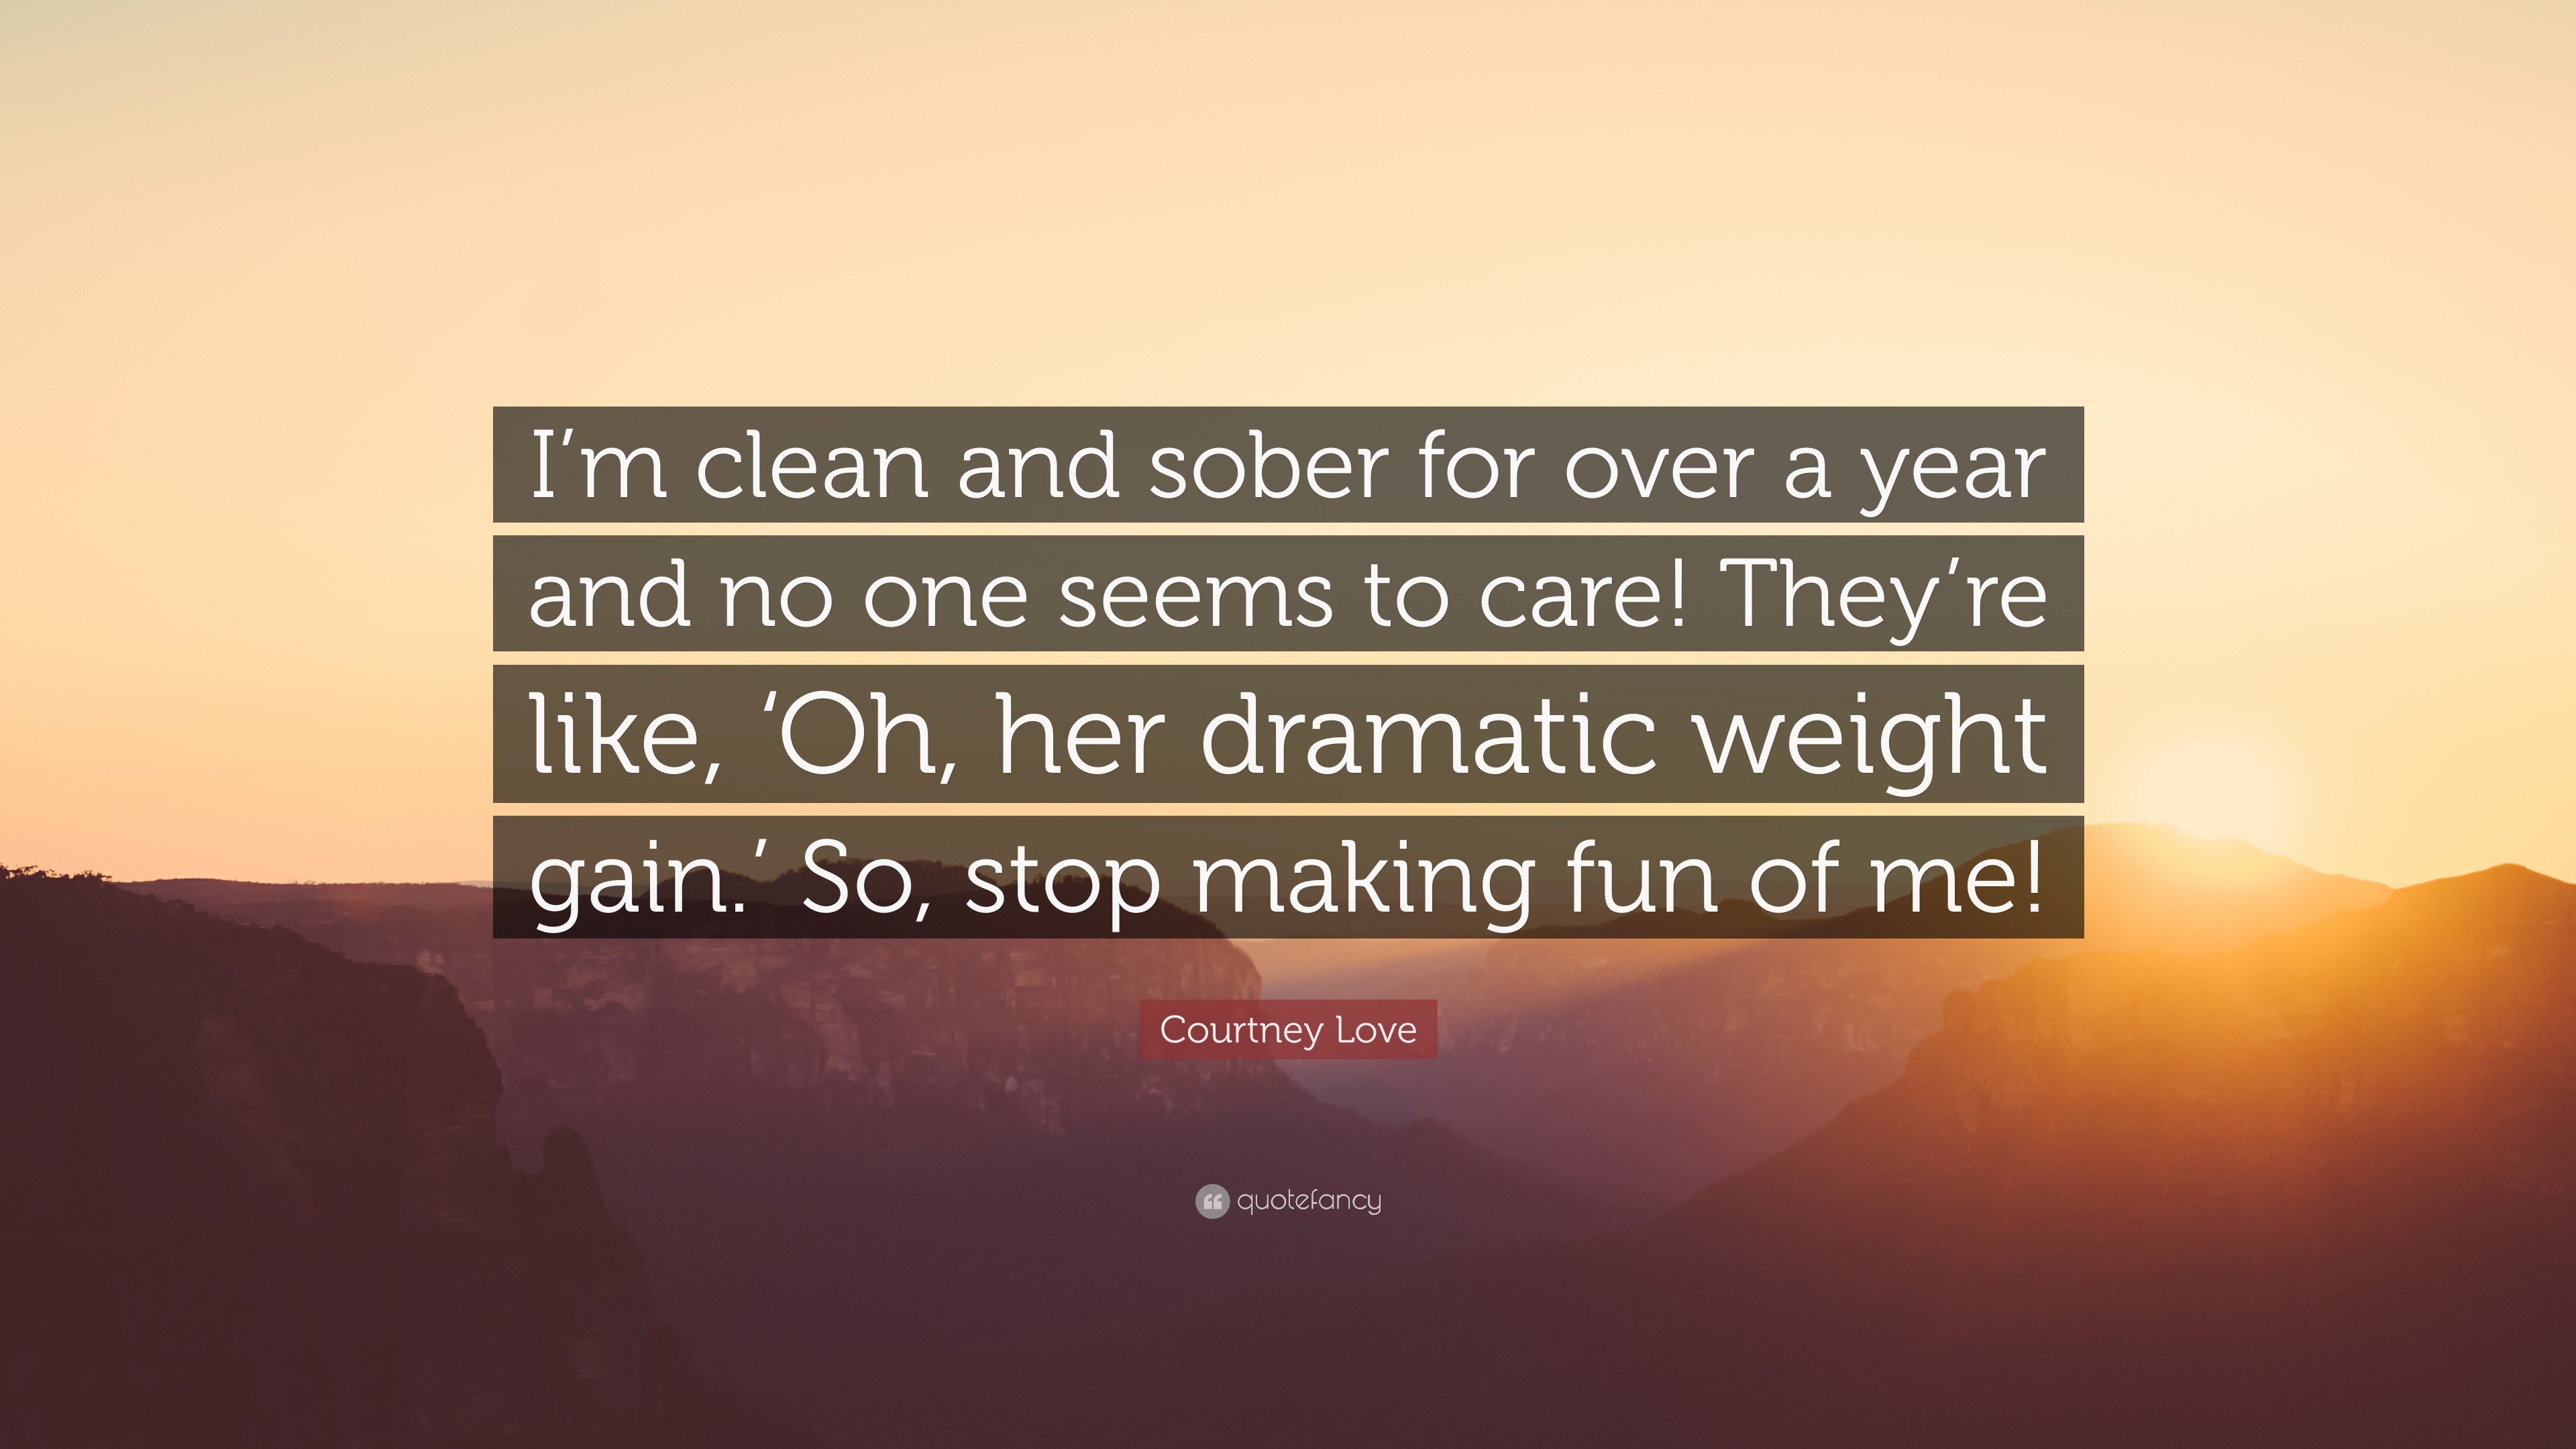 Courtney Love Quote I M Clean And Sober For Over A Year And No One Seems To Care They Re Like Oh Her Dramatic Weight Gain So Stop Mak 7 Wallpapers Quotefancy